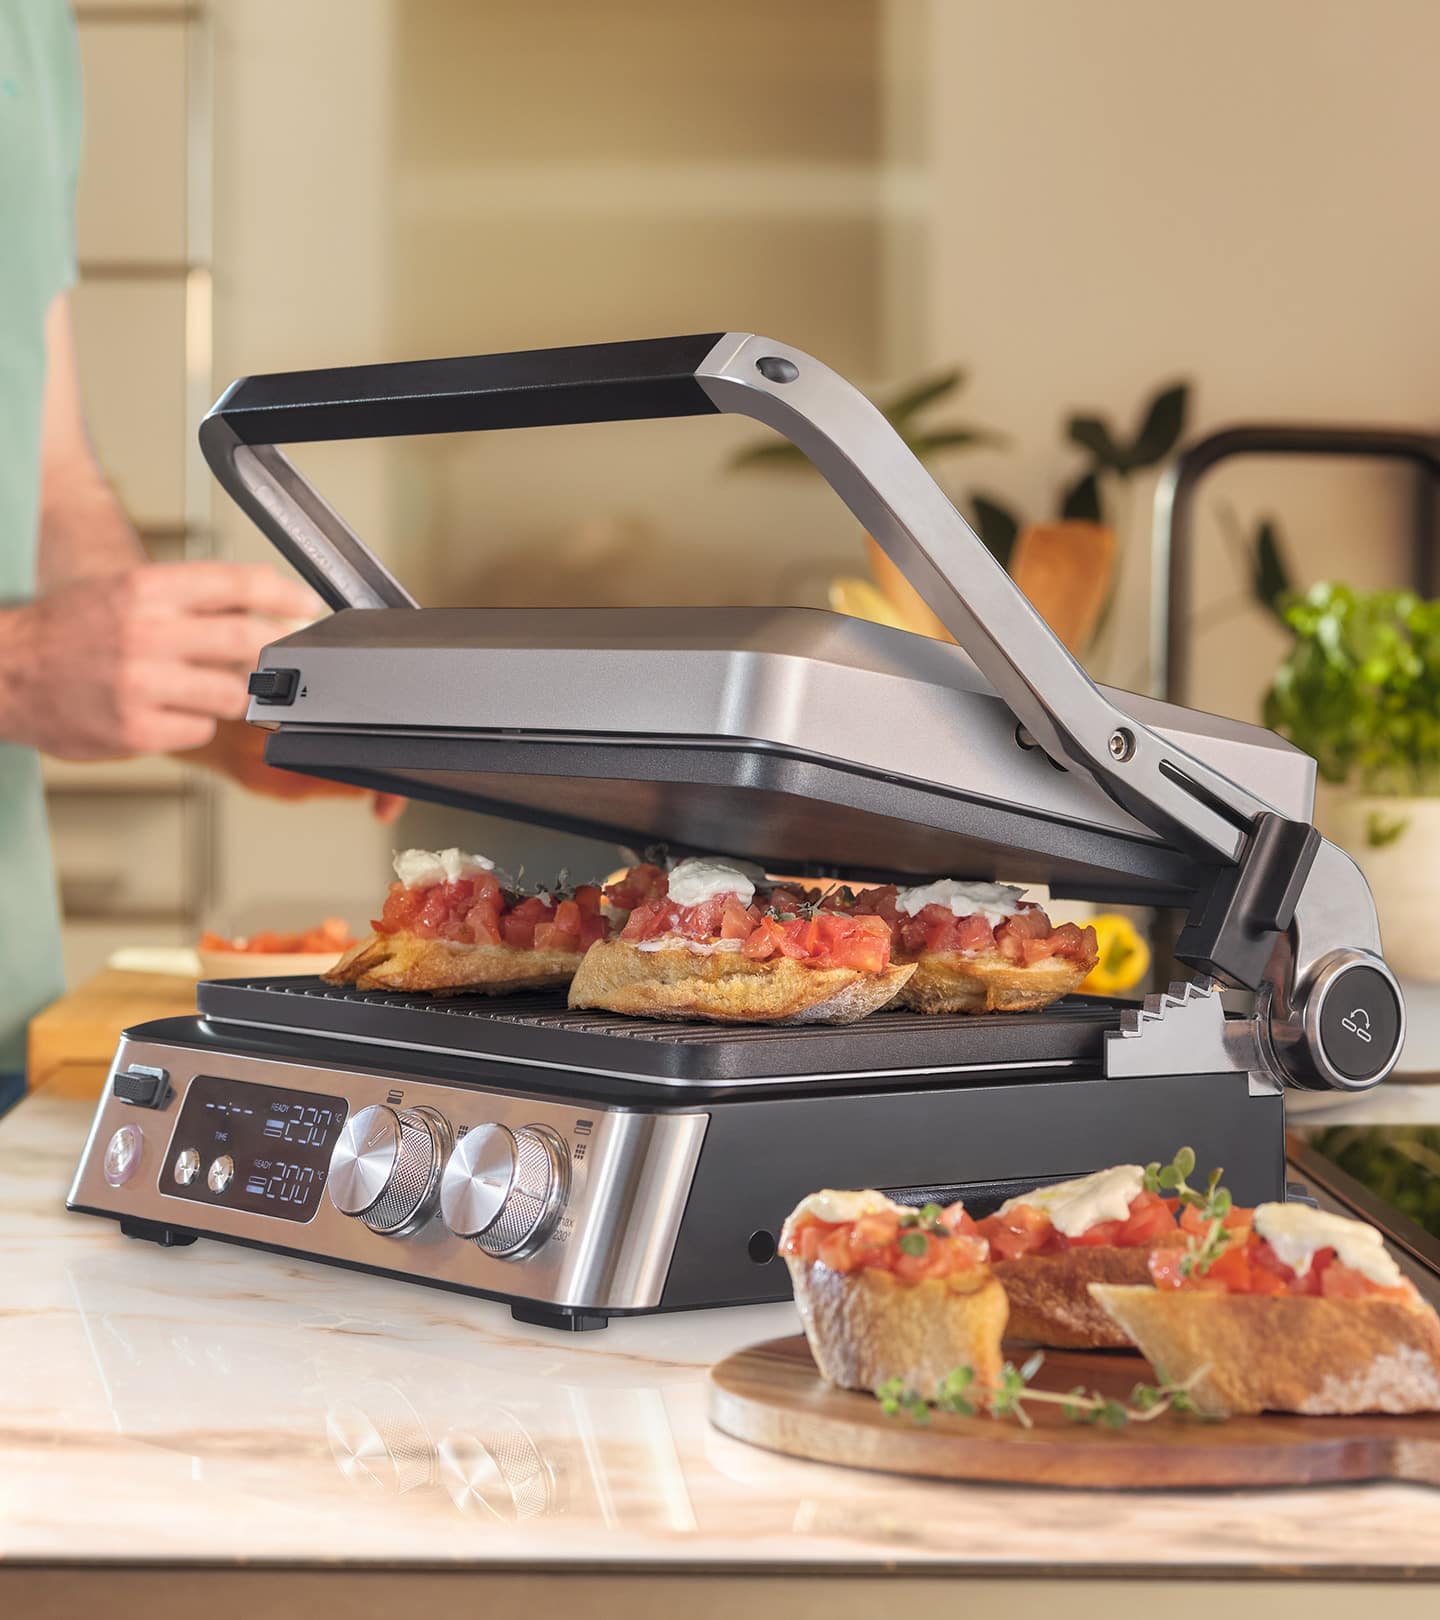 Braun MultiGrill 7 with Embedded heating elements